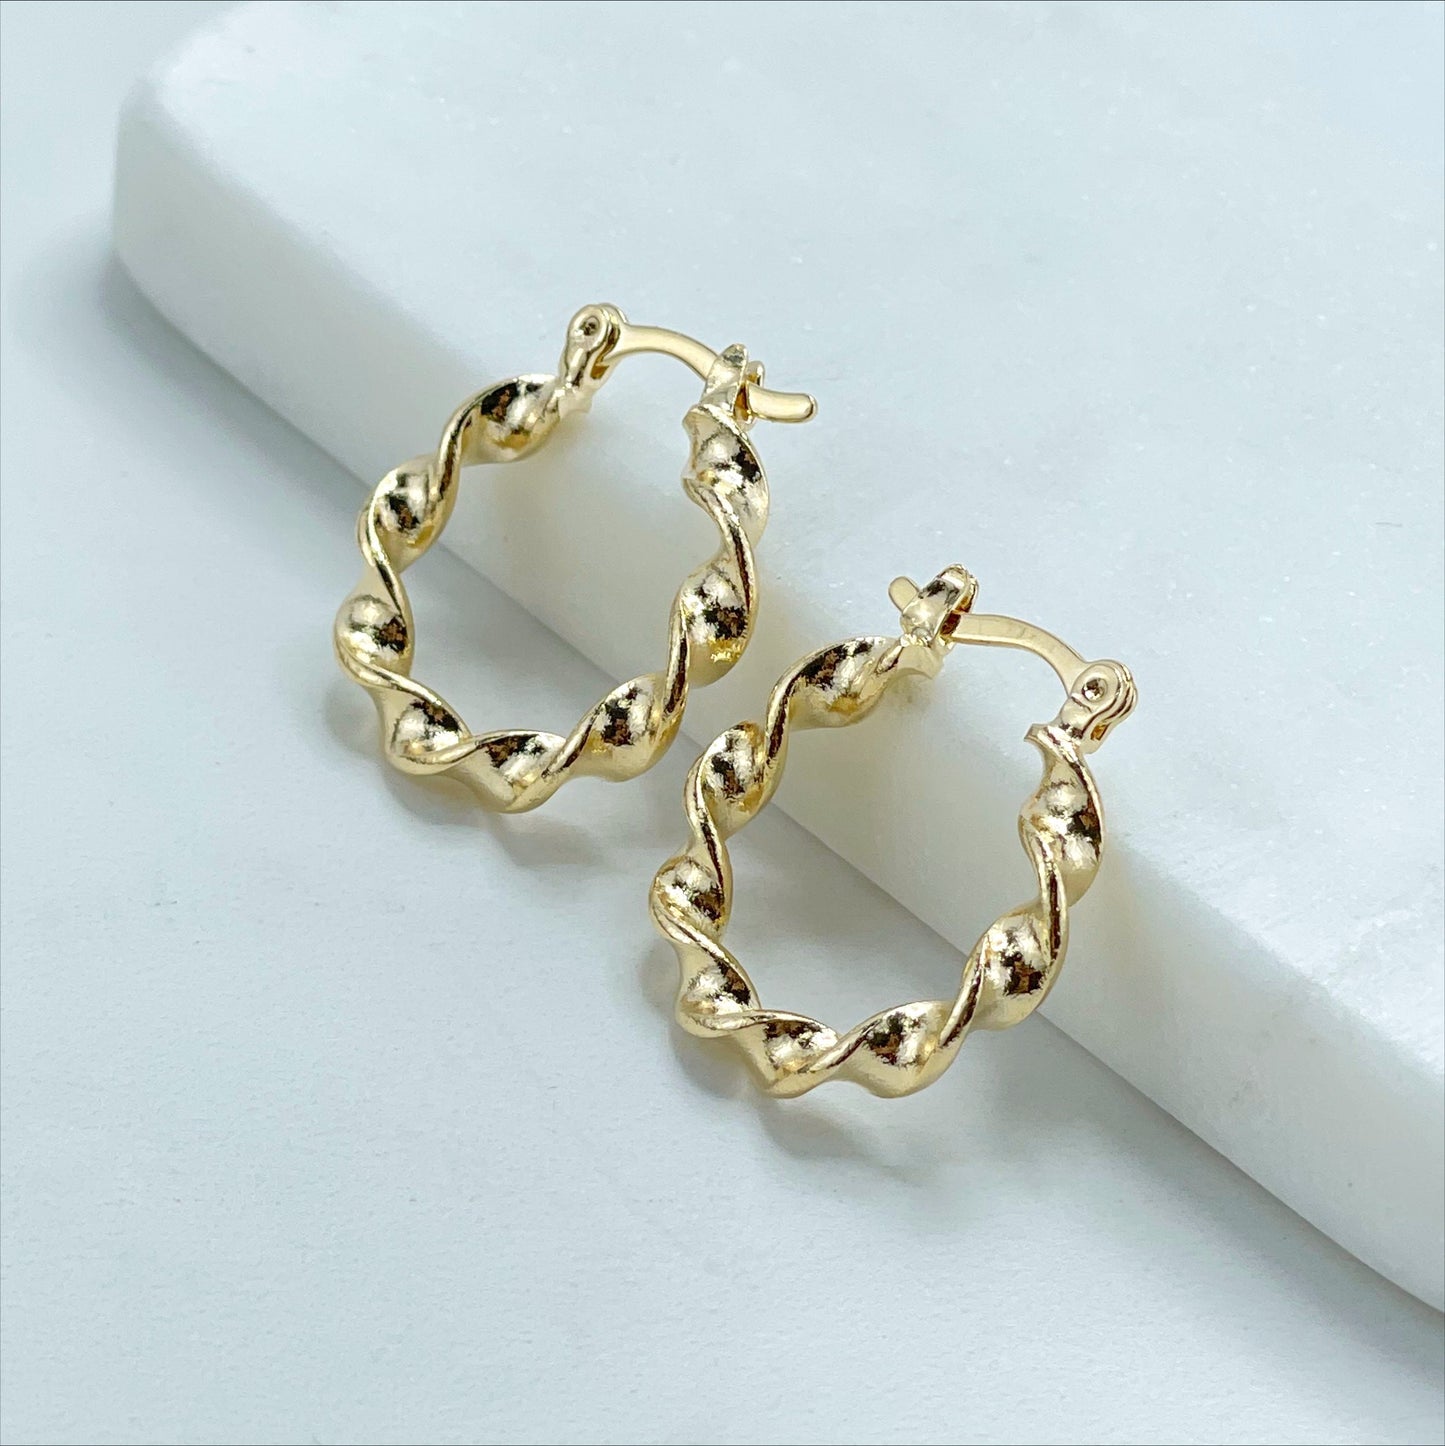 18k Gold Filled 20 or 30mm Twisted Hoop Earrings, Push Back Closure, Wholesale Jewelry Supplies